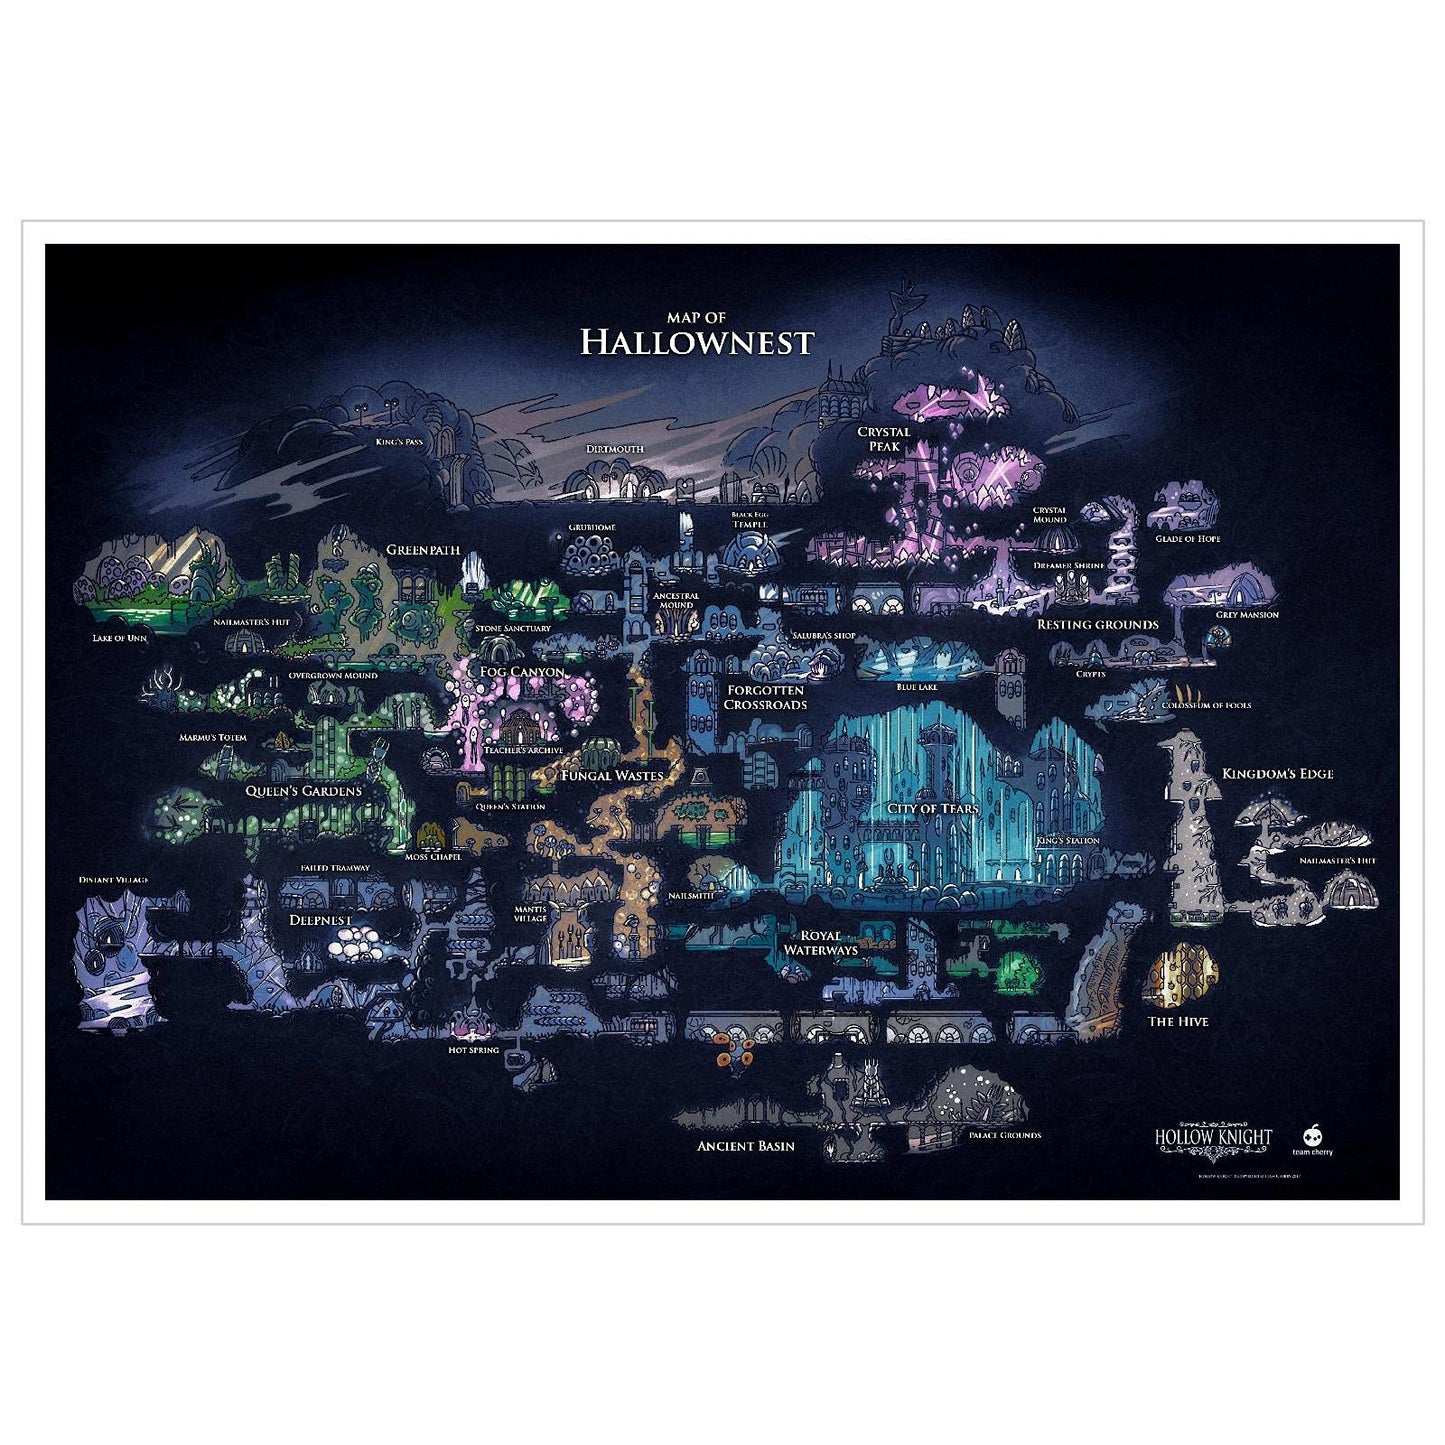 Hollownest T1175's Hollow Knight Map Poster Canvas Prints Wall Art For Home Office Decorations Unframed 18"x12"